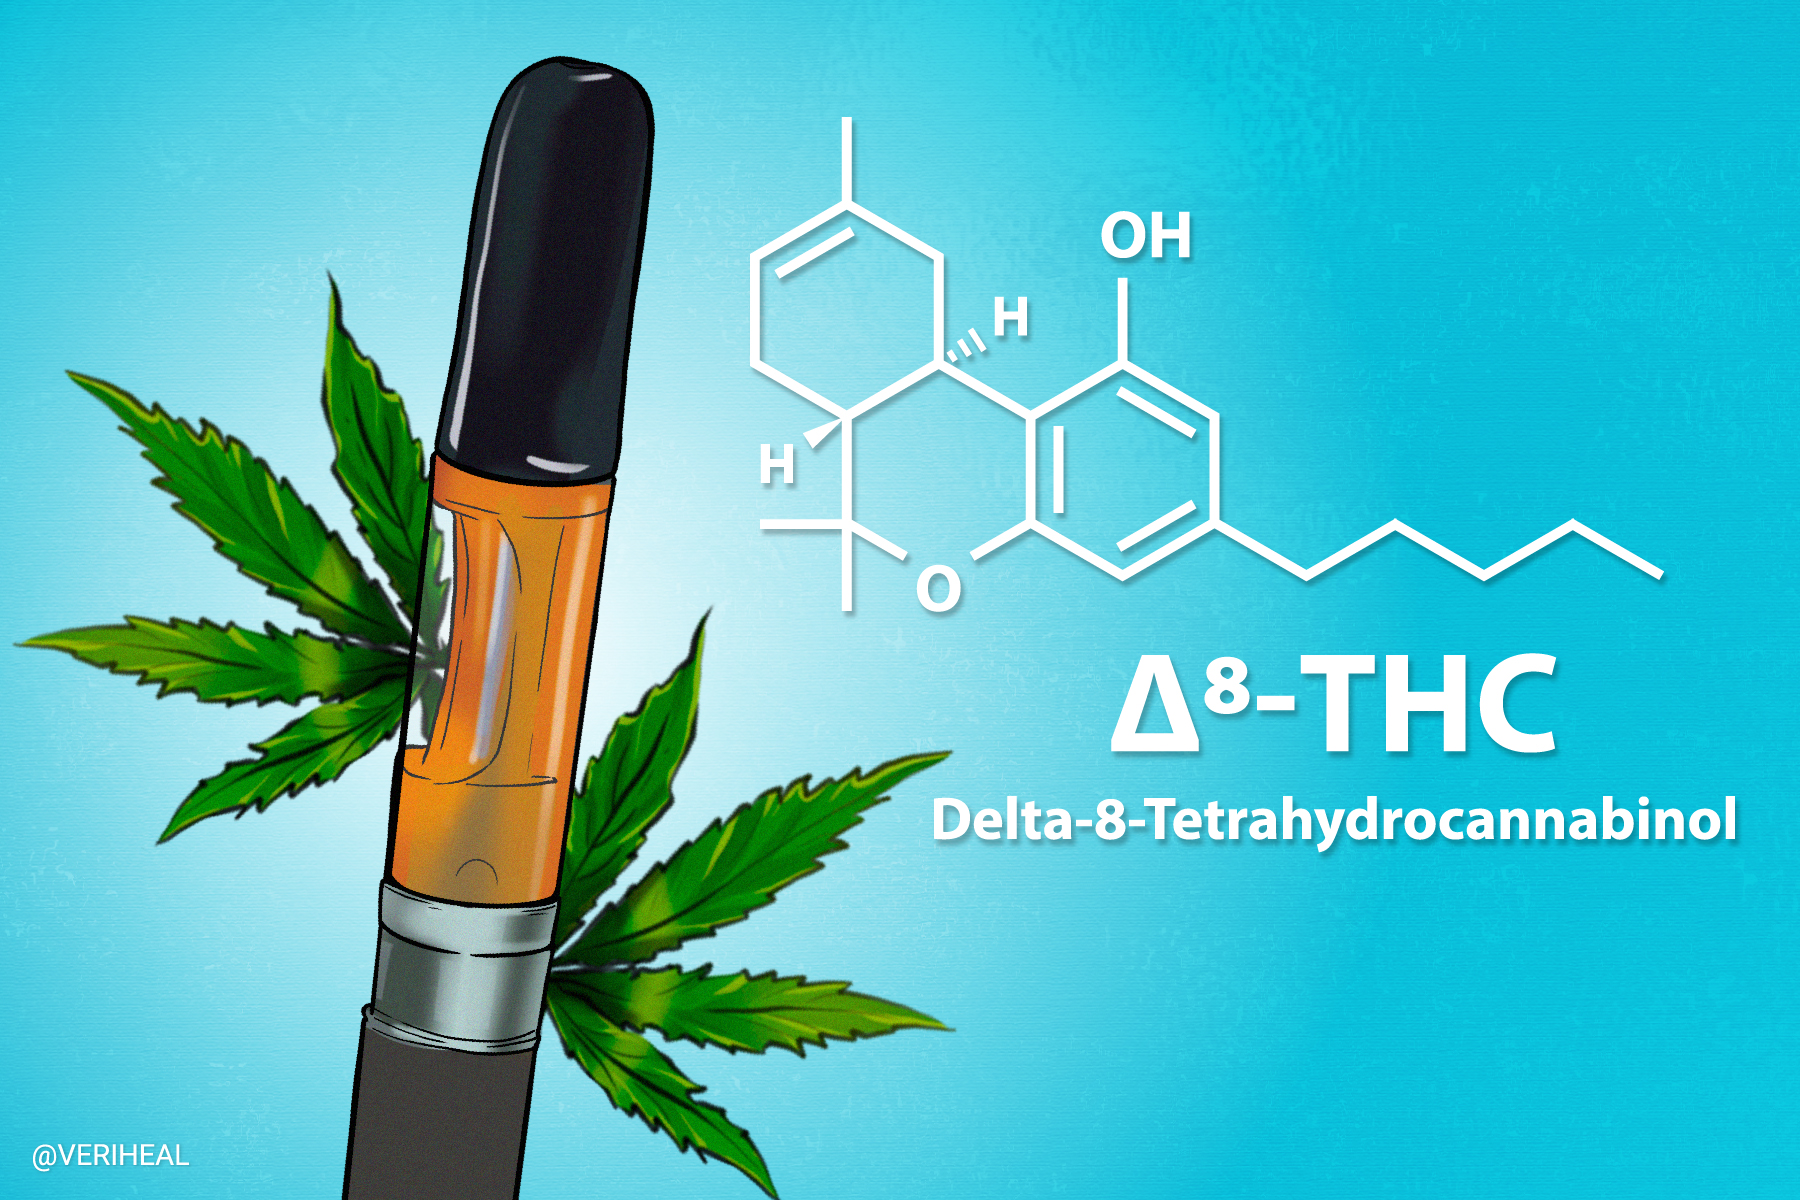 DELTA 8 INDICA TINCTURE - Gummies|Thc|Products|Hemp|Product|Brand|Effects|Delta|Gummy|Cbd|Origin|Quality|Dosage|Delta-8|Dose|Usasource|Flavors|Brands|Ingredients|Range|Customers|Edibles|Cartridges|Reviews|Side|List|Health|Cannabis|Lab|Customer|Options|Benefits|Overviewproducts|Research|Time|Market|Drug|Farms|Party|People|Delta-8 Thc|Delta-8 Products|Delta-9 Thc|Delta-8 Gummies|Delta-8 Thc Products|Delta-8 Brands|Customer Reviews|Brand Overviewproducts|Drug Tests|Free Shipping|Similar Benefits|Vape Cartridges|Hemp Doctor|United States|Third Party Lab|Drug Test|Thc Edibles|Health Canada|Cannabis Plant|Side Effects|Organic Hemp|Diamond Cbd|Reaction Time|Legal Hemp|Psychoactive Effects|Psychoactive Properties|Third Party|Dry Eyes|Delta-8 Market|Tolerance Level